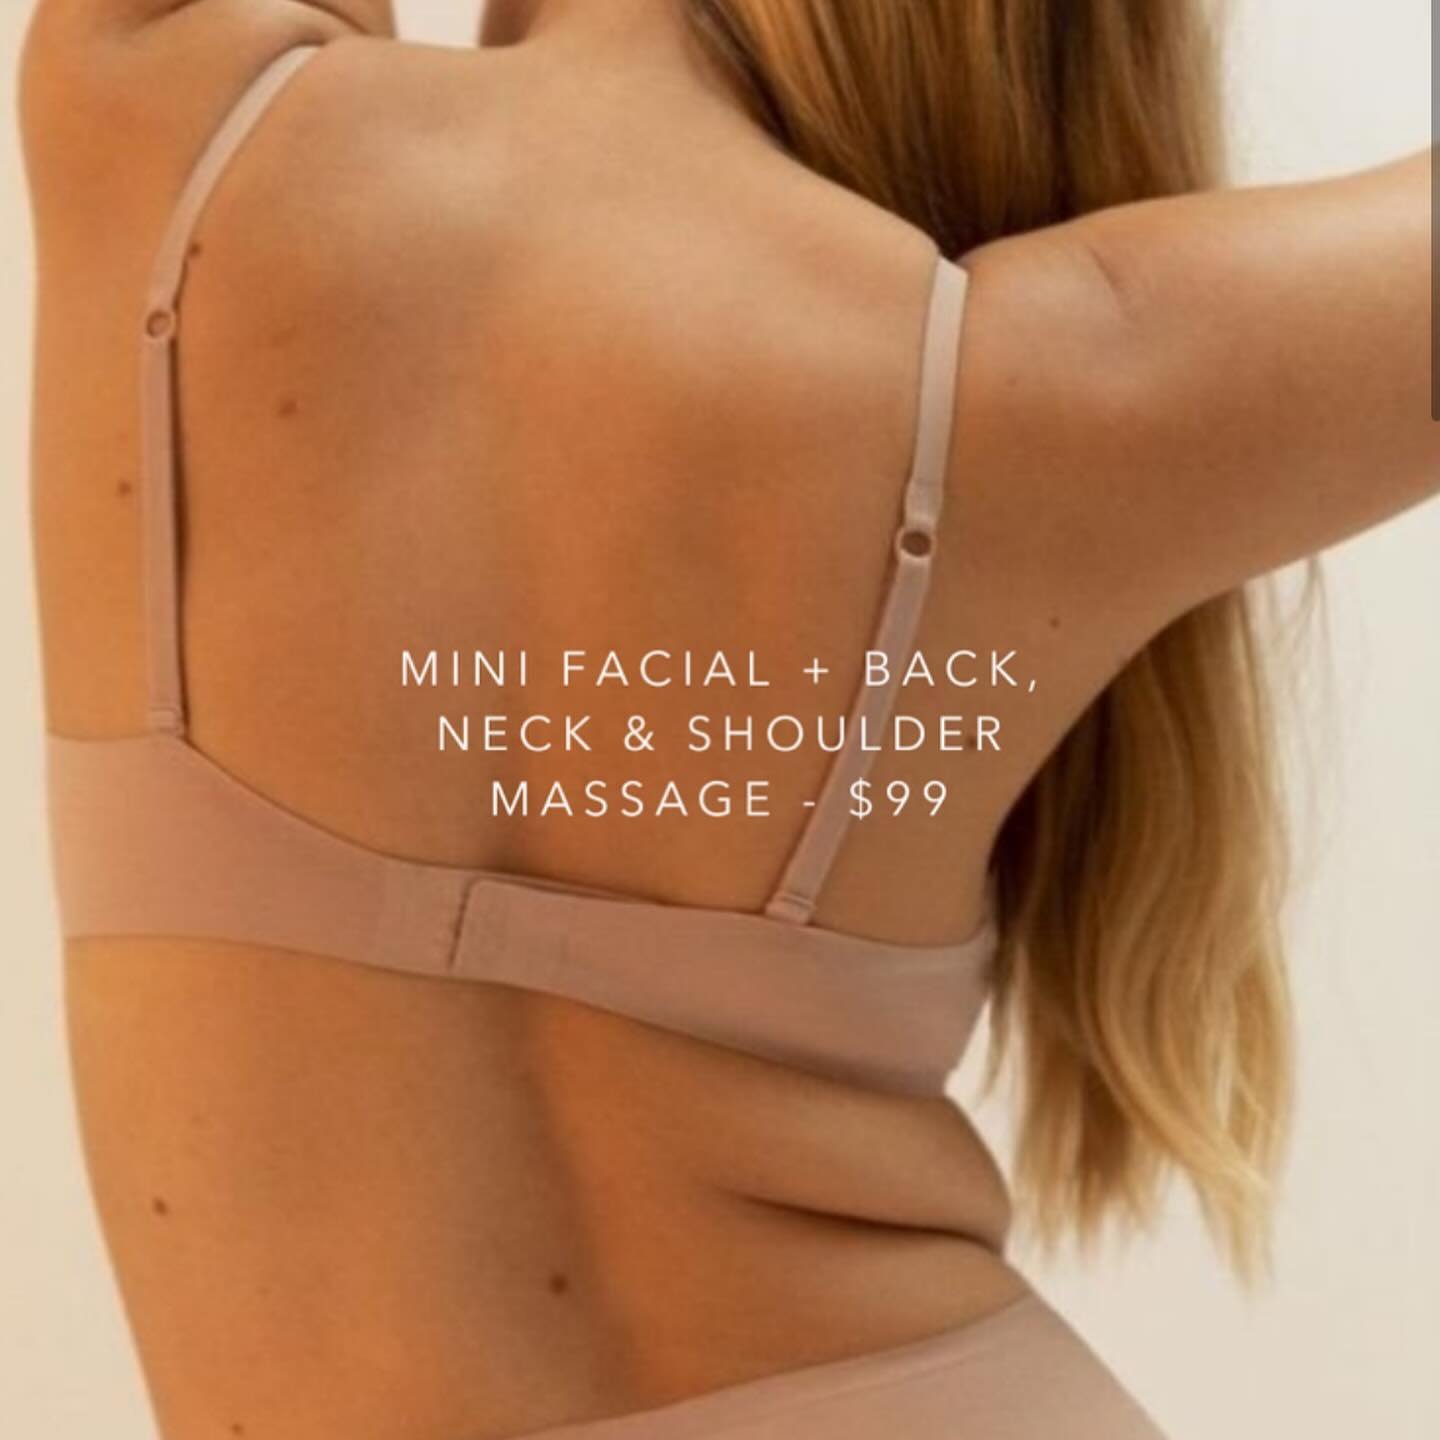 ✨ School holidays are finally here, and it&rsquo;s time to treat yourself! 💆&zwj;♀️ Whether you&rsquo;re looking for a pampering facial, relaxing massage, teen facial, or some brow love, we&rsquo;ve got you covered!

🌸 Treat yourself to a Mini Faci